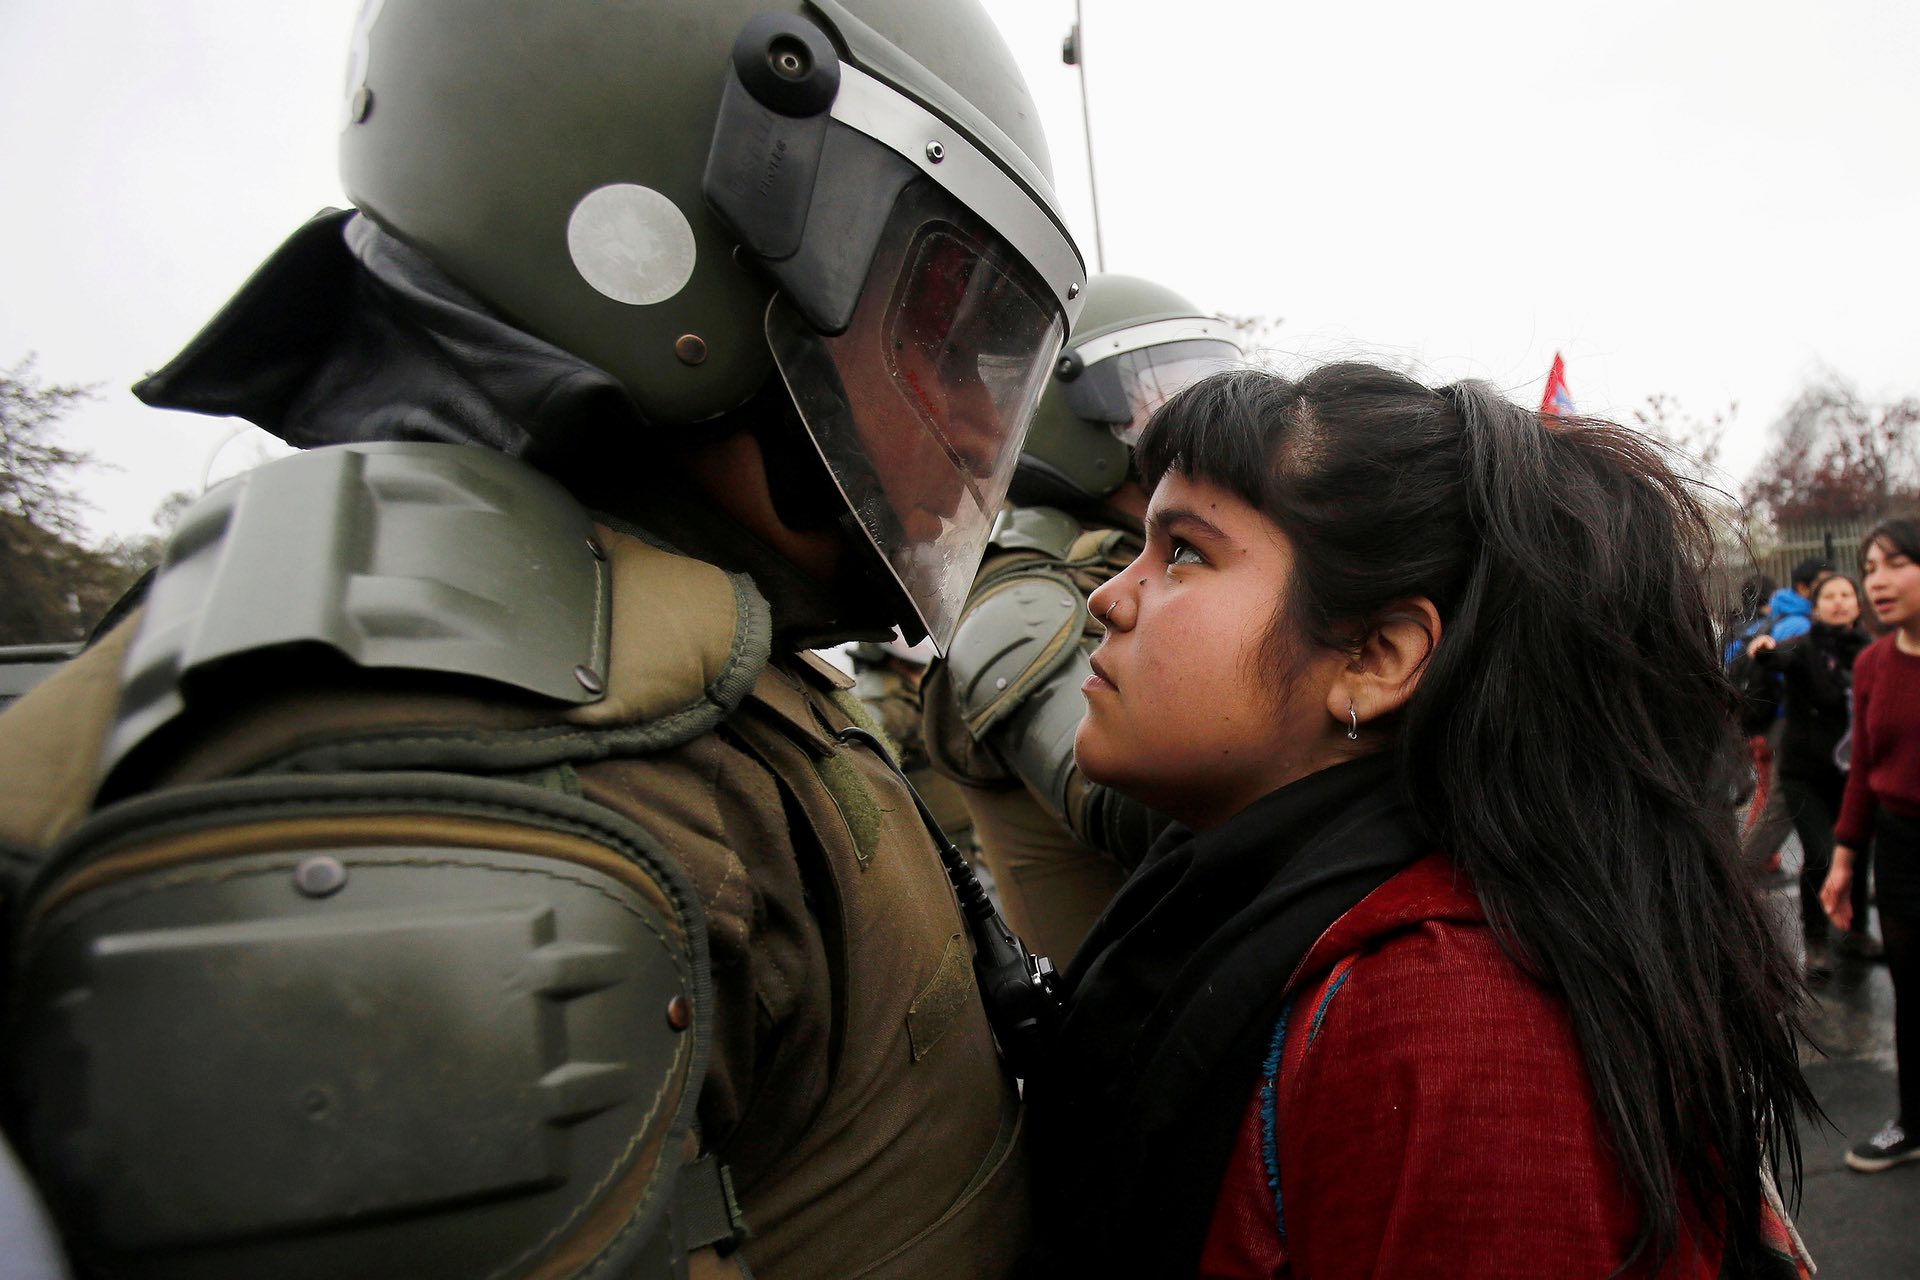 A demonstrator faces down a riot policeman during a protest marking the countryâs 1973 military coup in Santiago, Chile on 11 September 2016. PHOTO: REUTERS